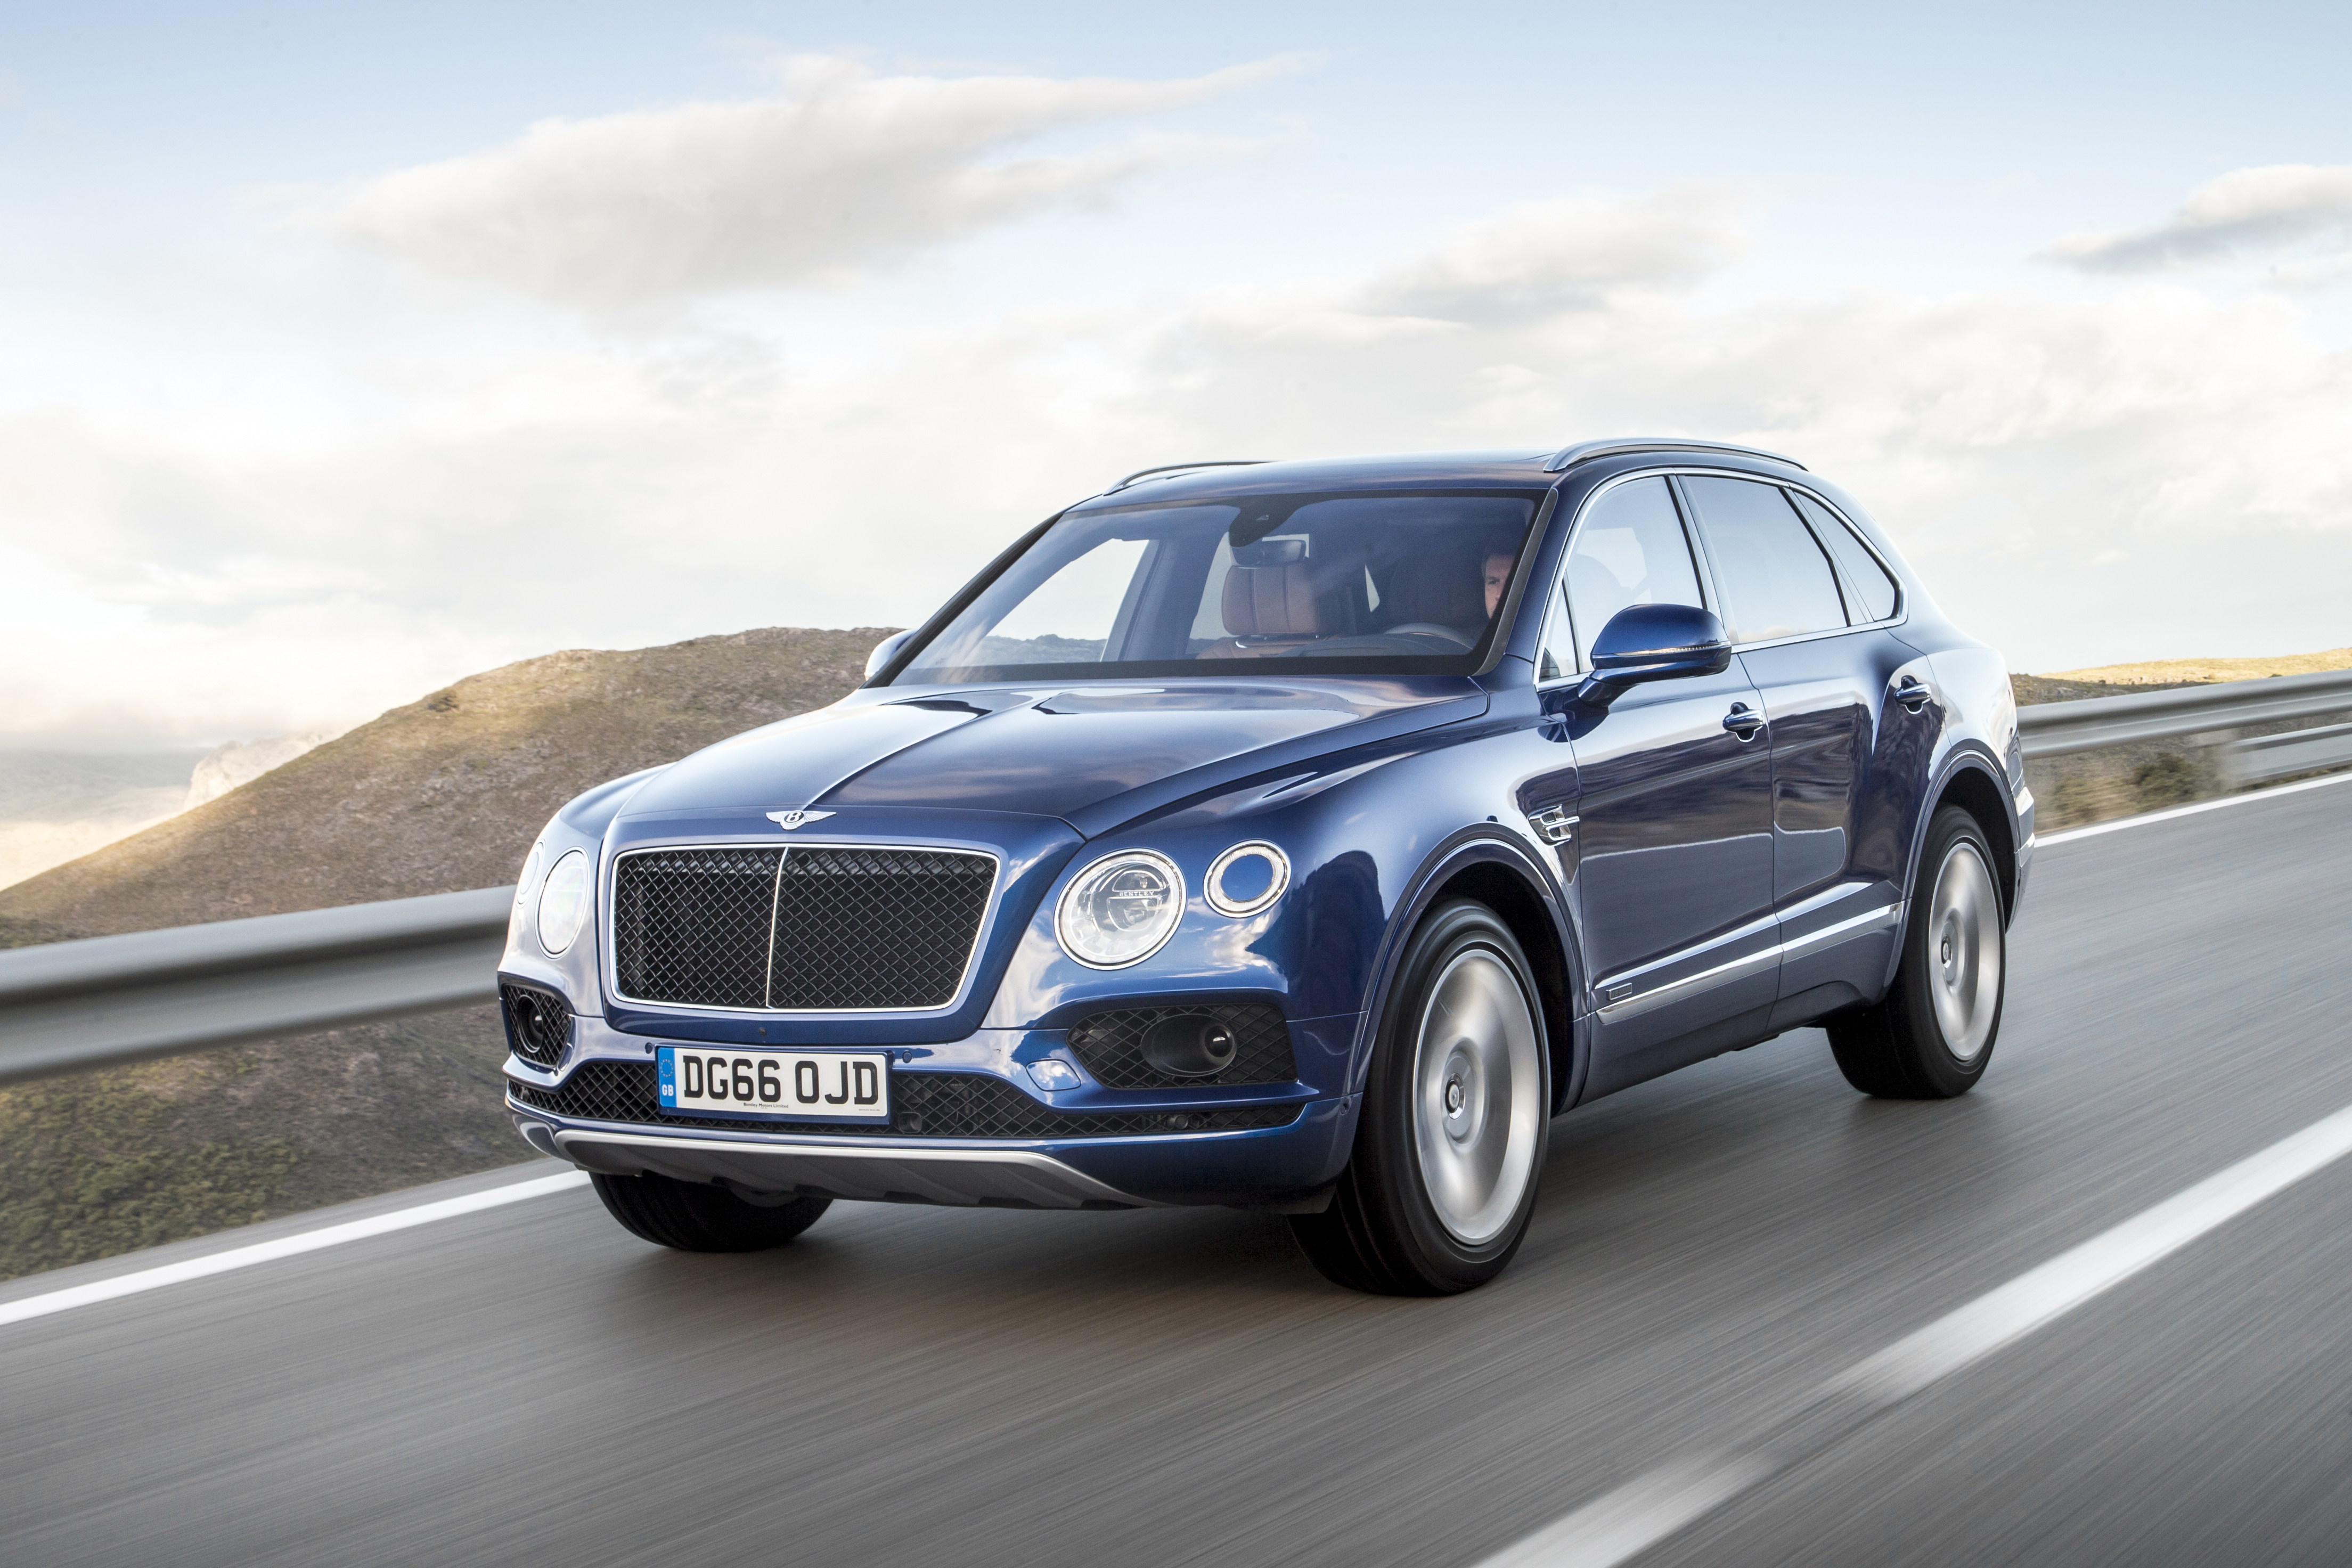 a blue Bentley Bentayga SUV at speed on a scenic road